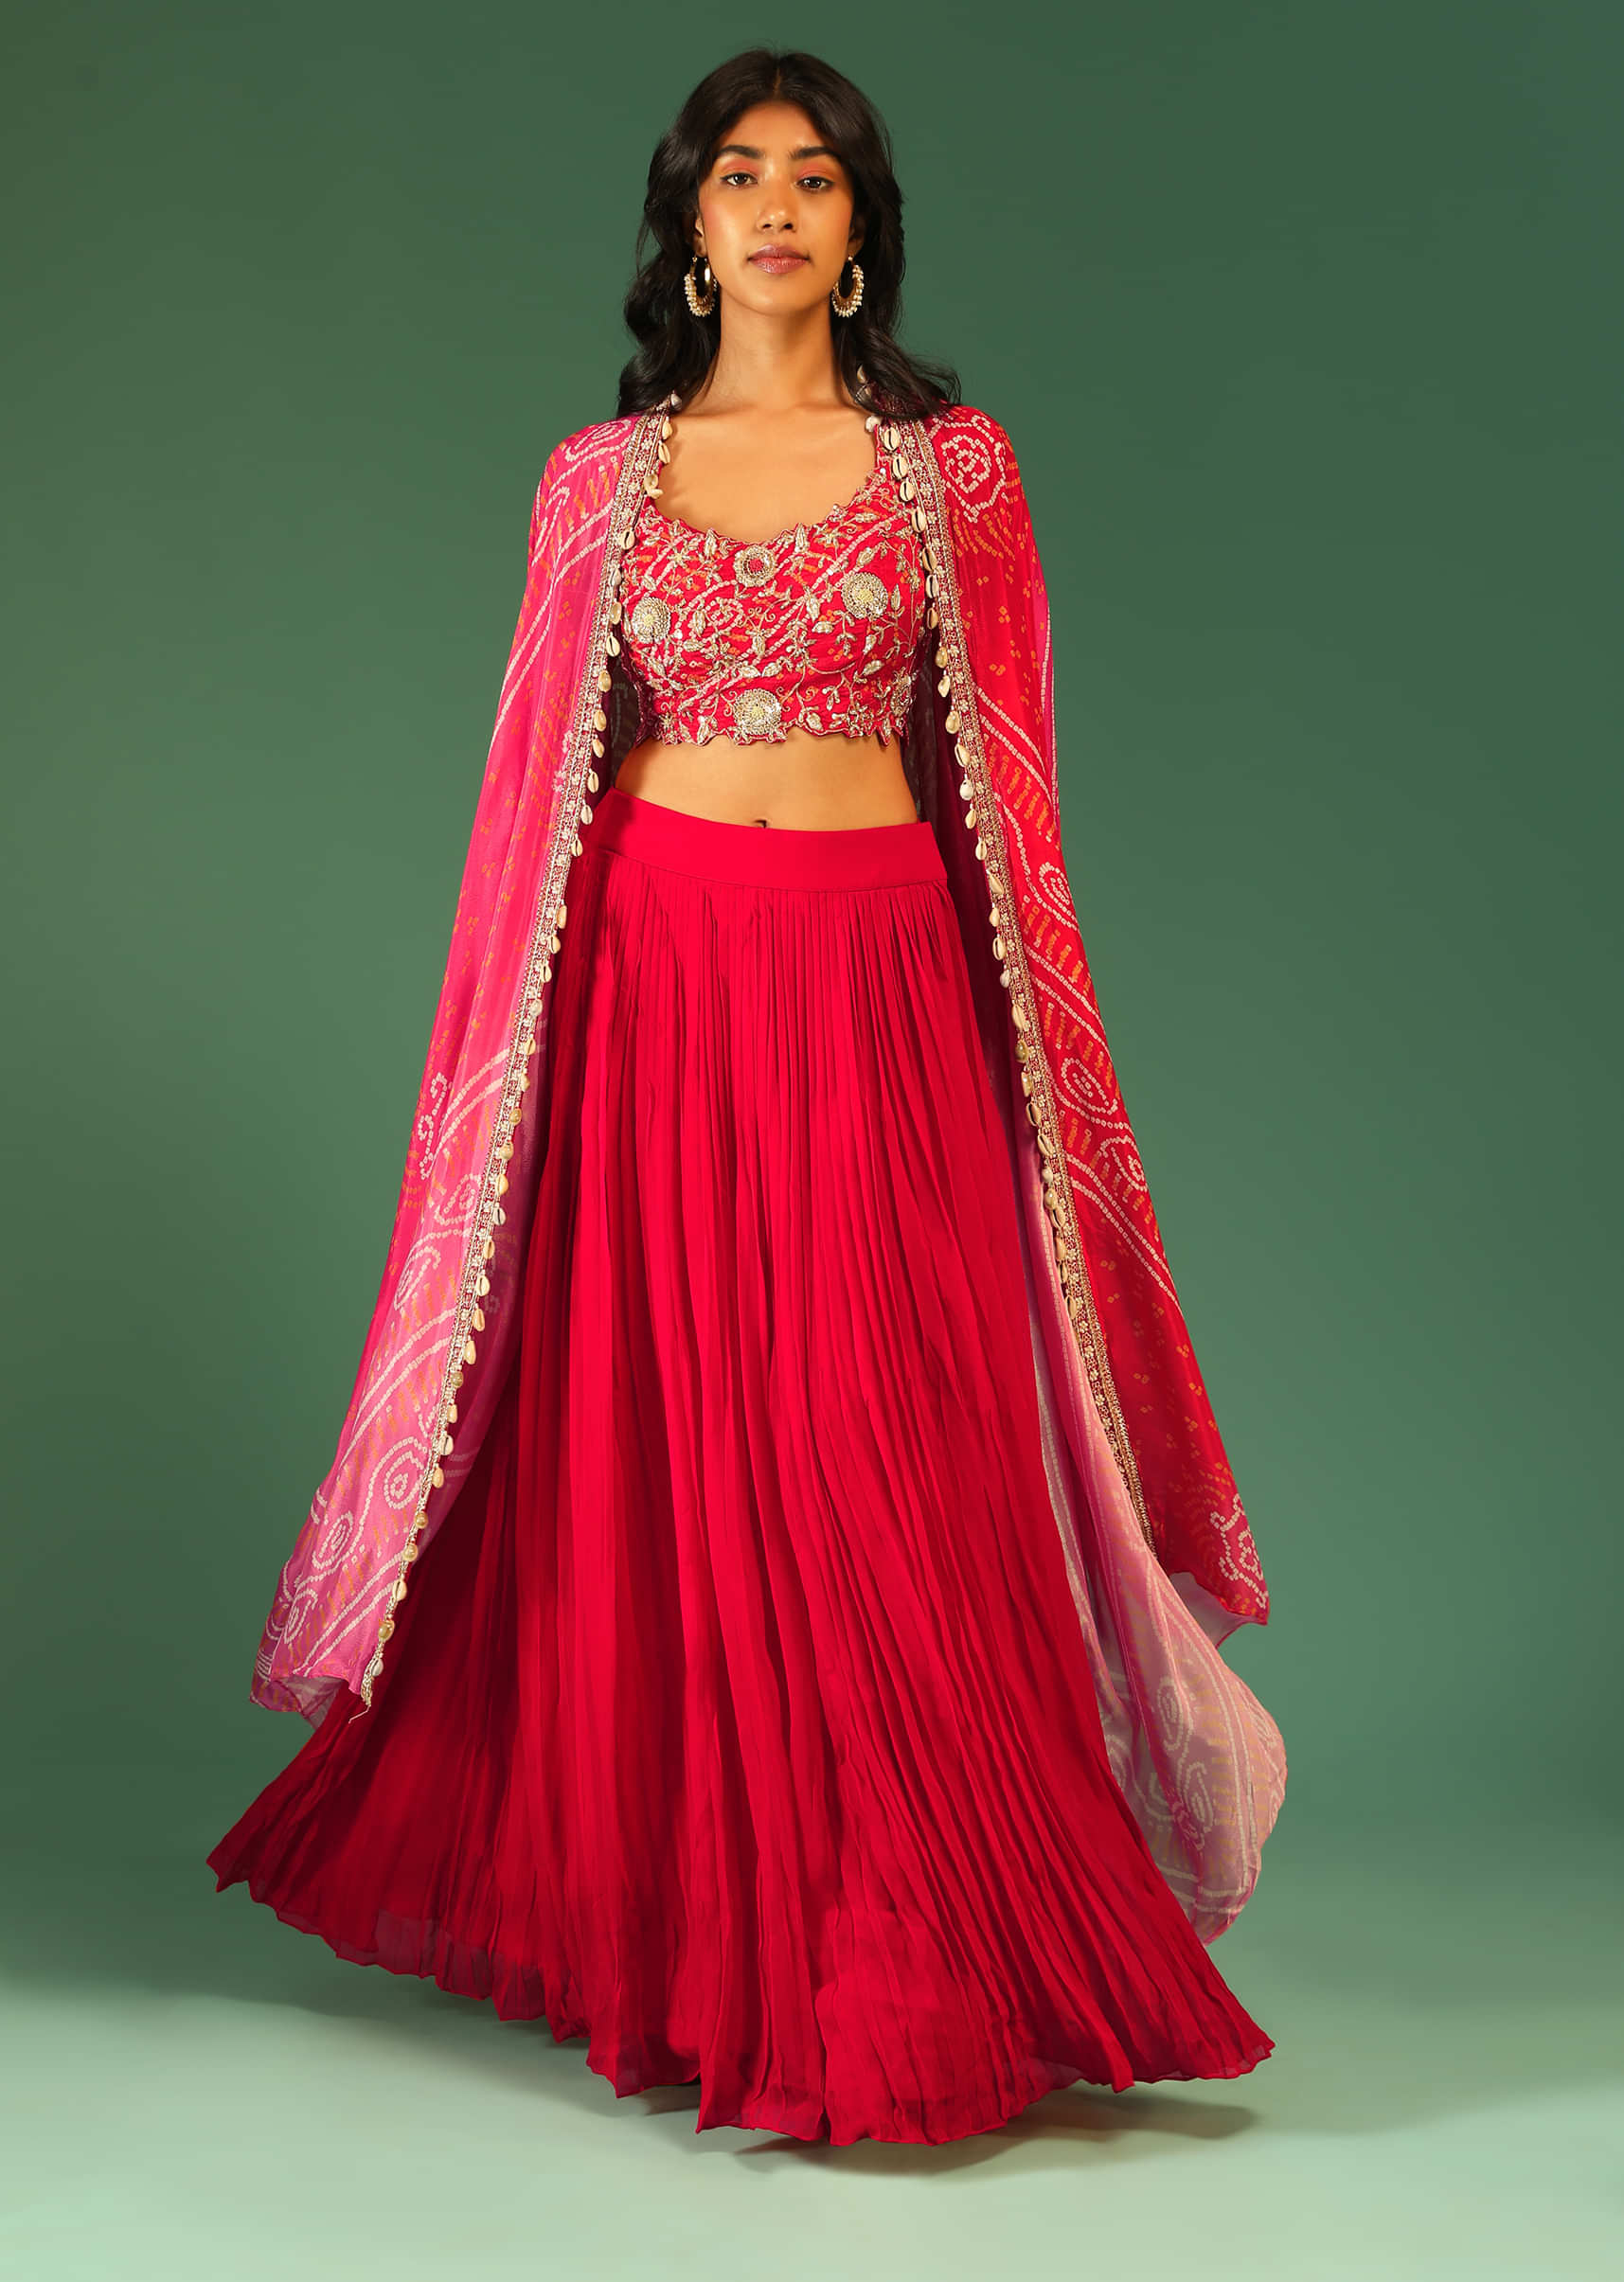 Red Crop Top Skirt Set With Sequins And Zari Embroidery And A Shaded Bandhani Printed Jacket 